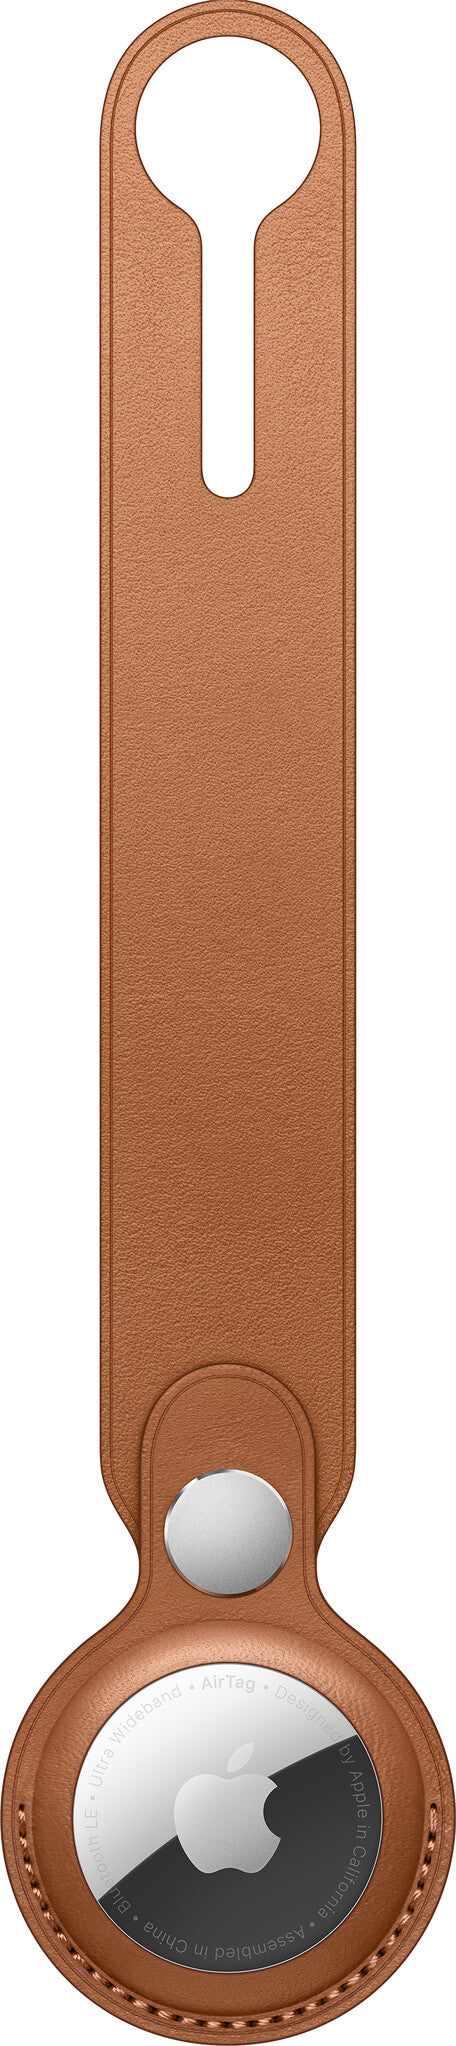 Apple MX4A2ZM/A - AirTag Leather Loop in Saddle Brown